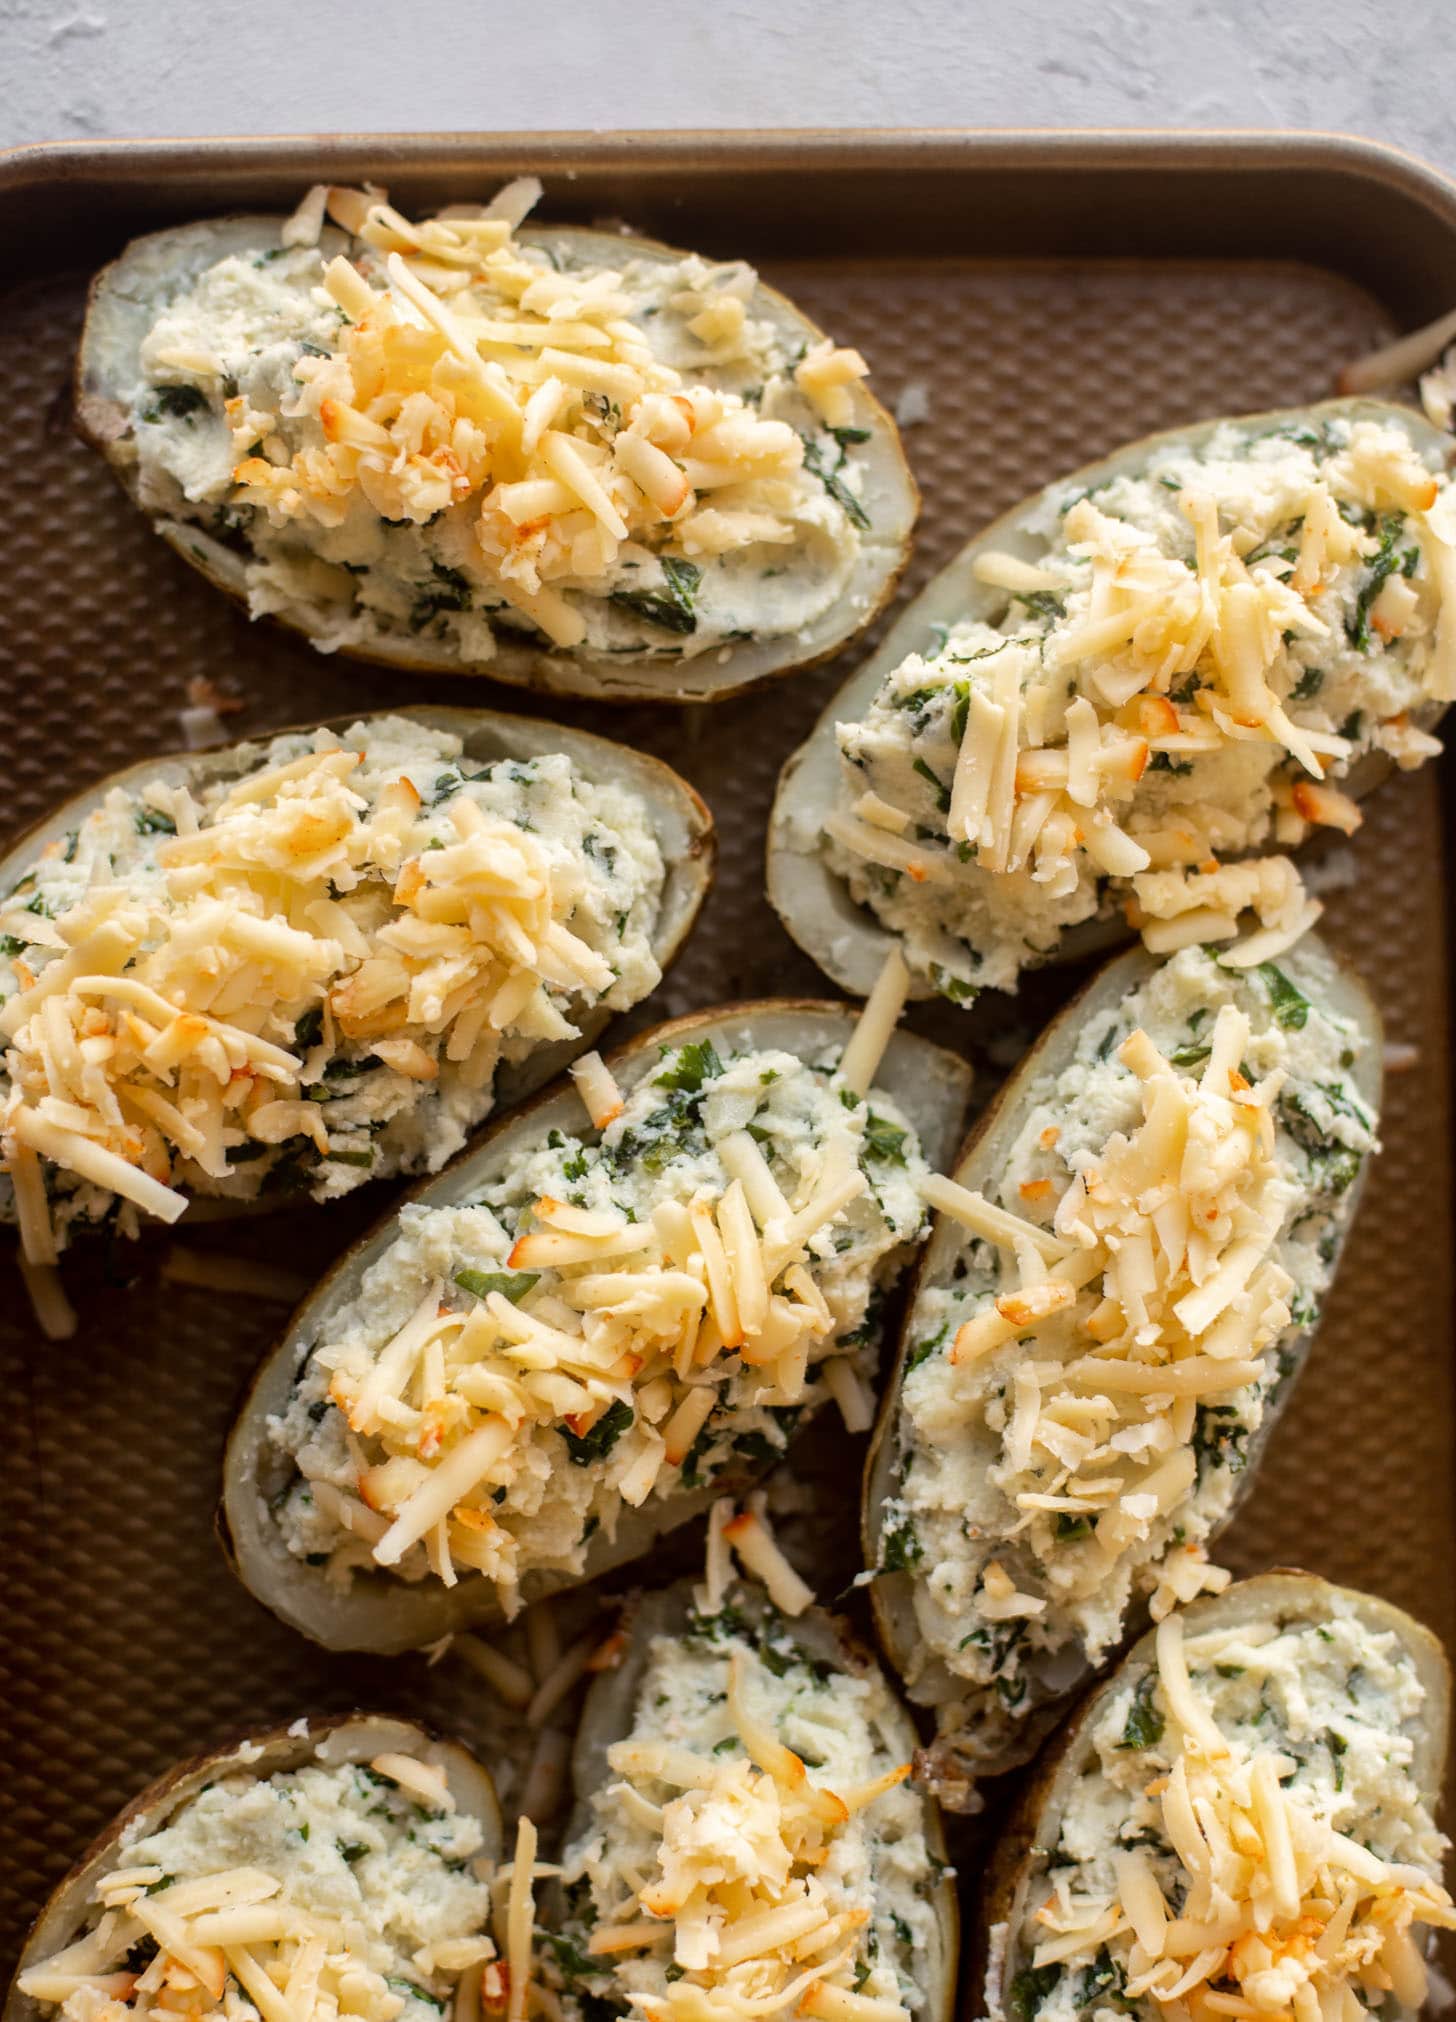 kale and smoked cheddar twice baked potatoes before baking